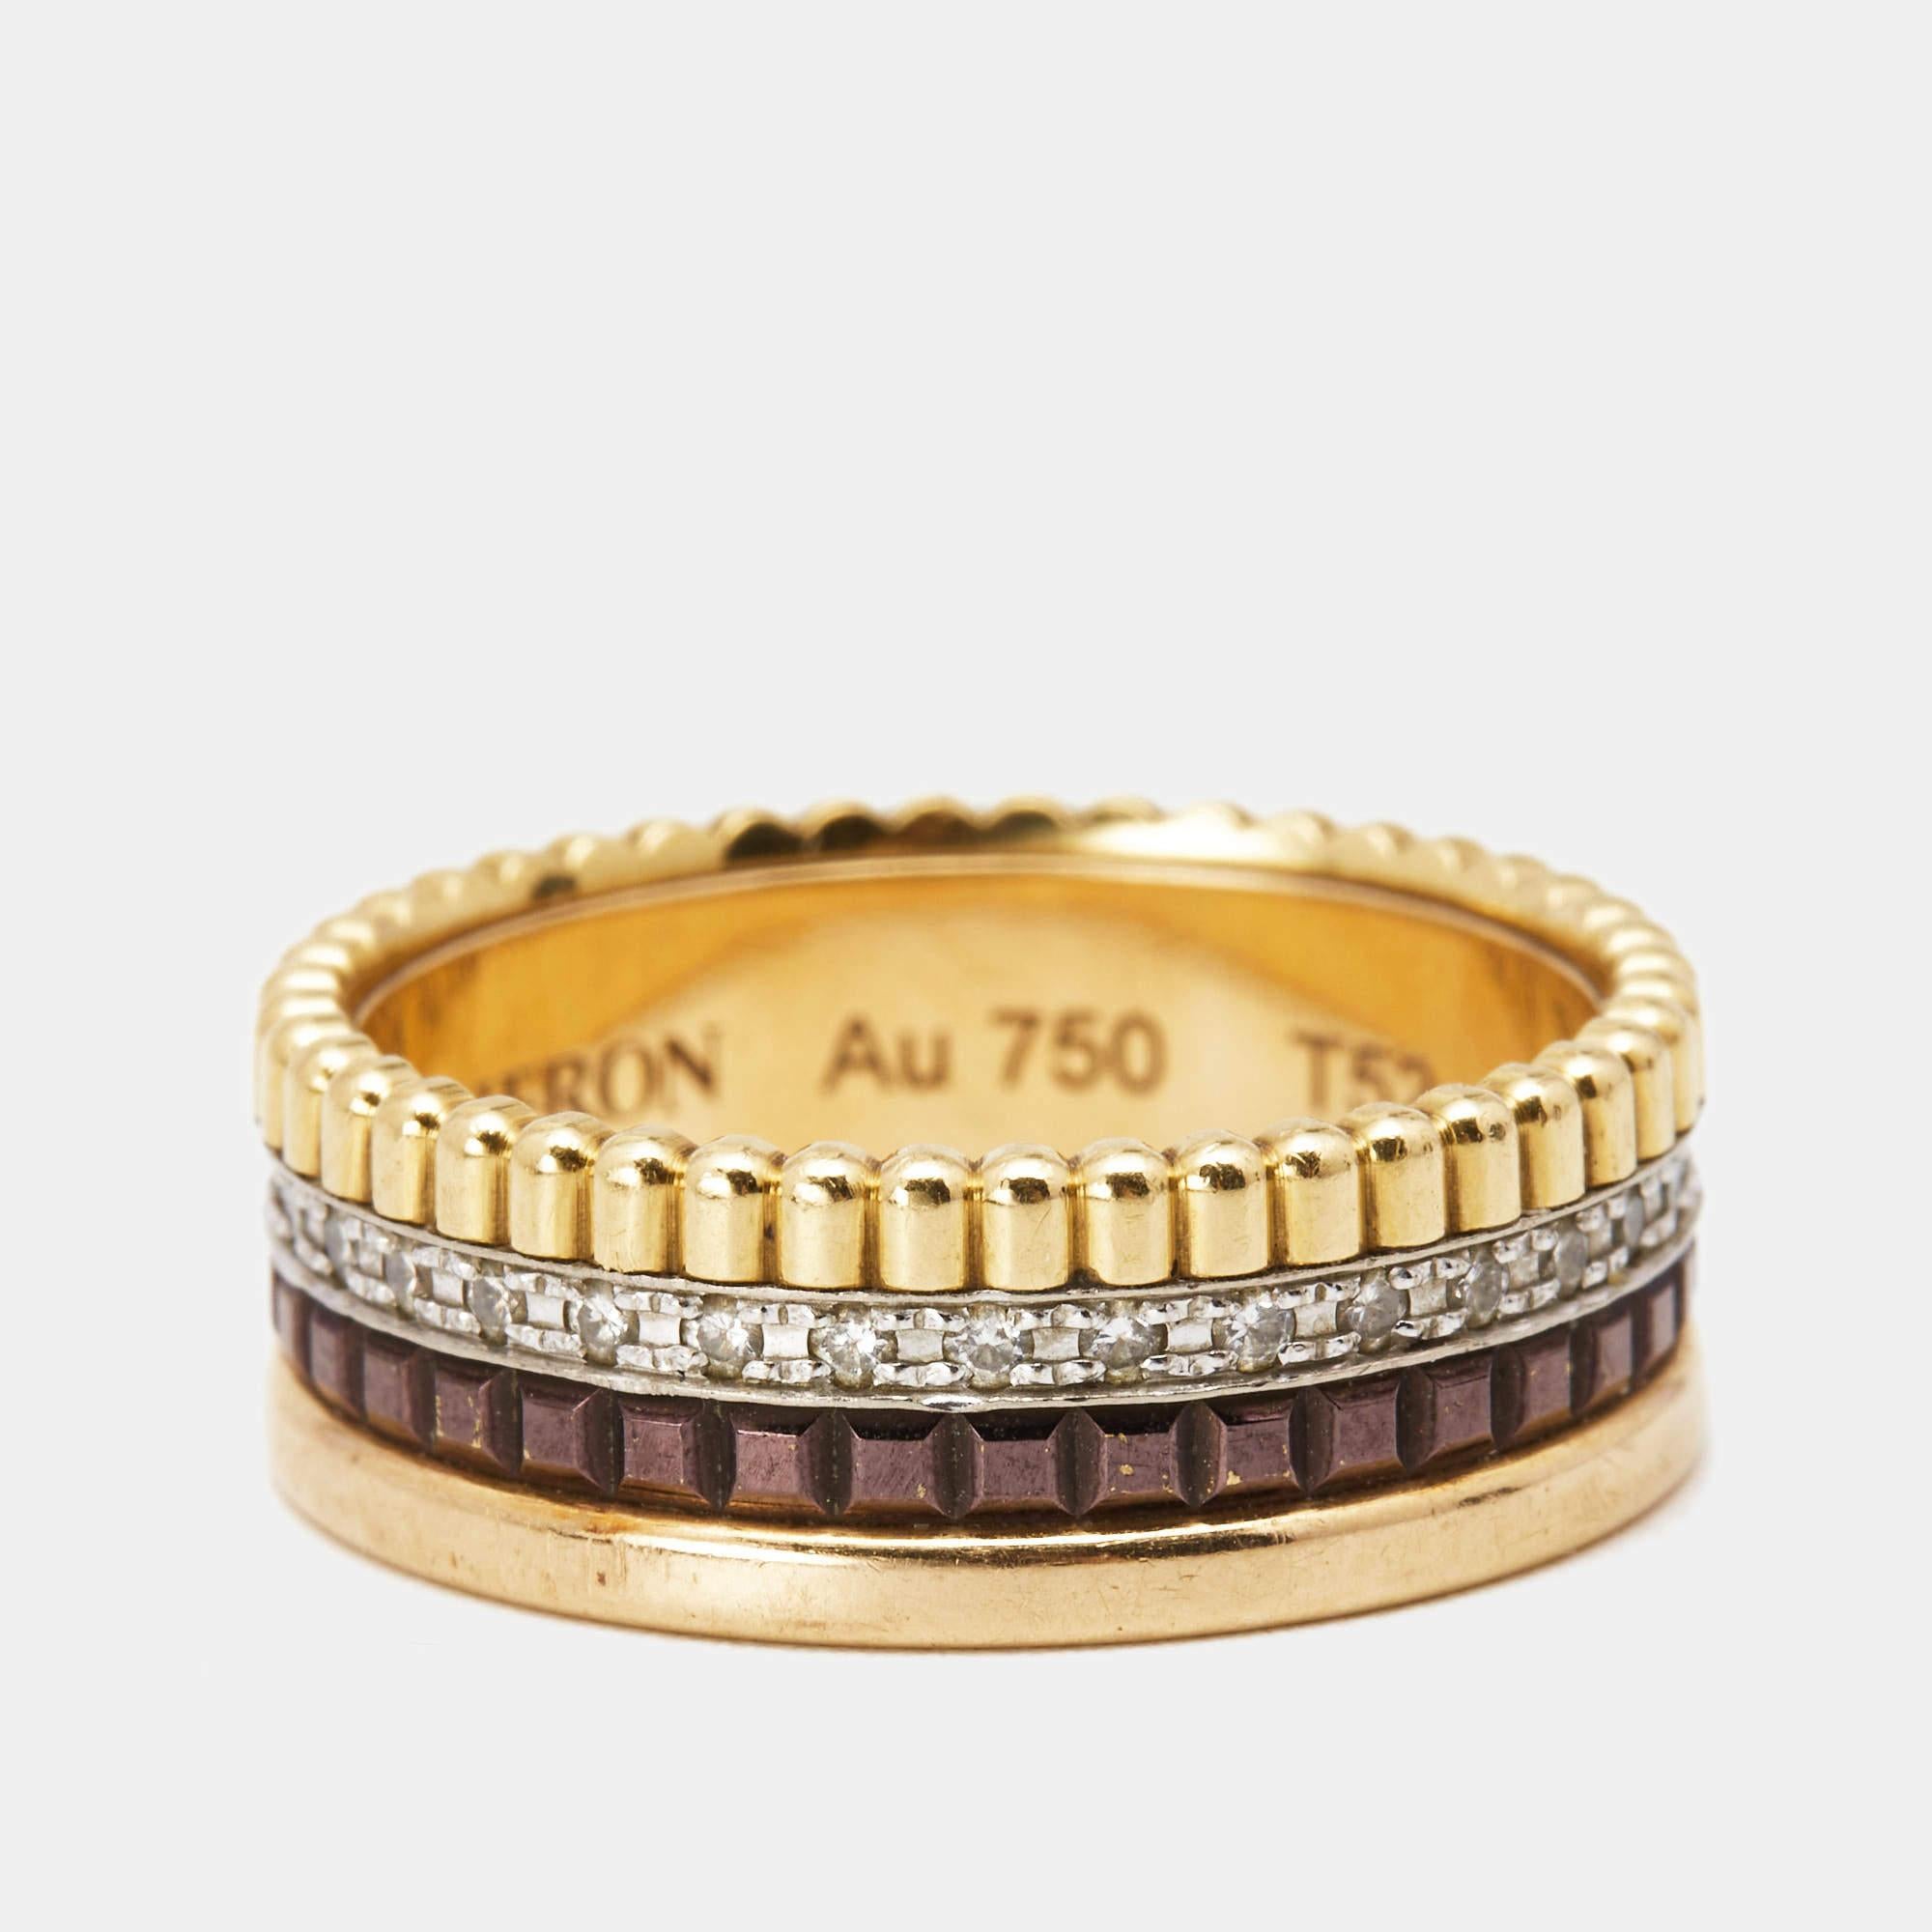 The Boucheron ring is an exquisite piece of jewelry that showcases elegance and sophistication. Crafted from 18k three-tone gold, its intricate design features iconic Quatre collection motifs adorned with sparkling diamonds, creating a timeless and